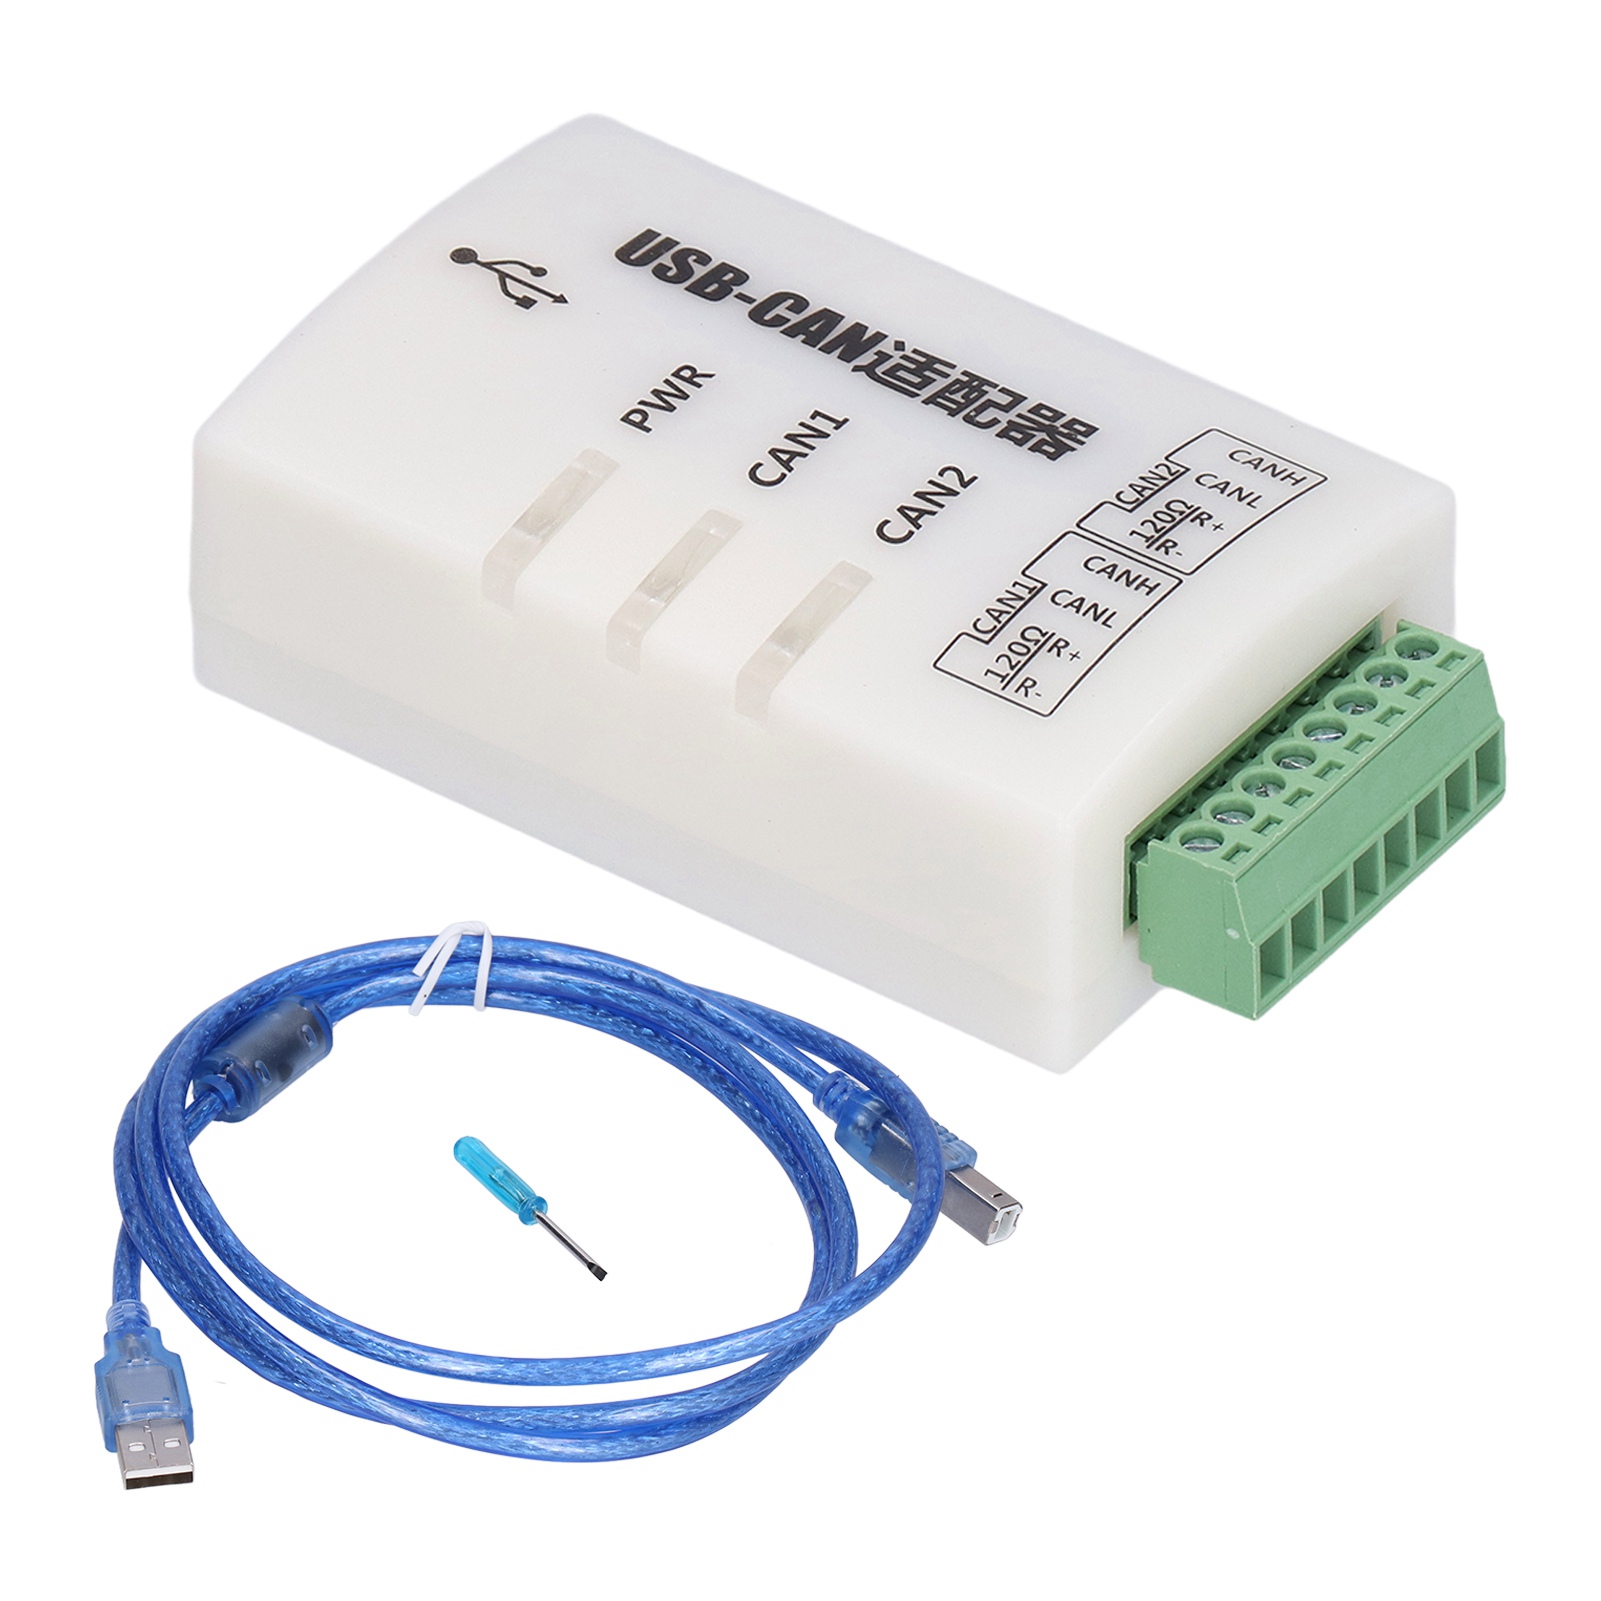 EBTOOLS CAN Intelligent Converter Adapter,CAN USB Adapter Dual Channel  Automatic CAN Bus Analyzer Intelligent Converter Debugger J1939,CAN  Analyzer With USB Cable